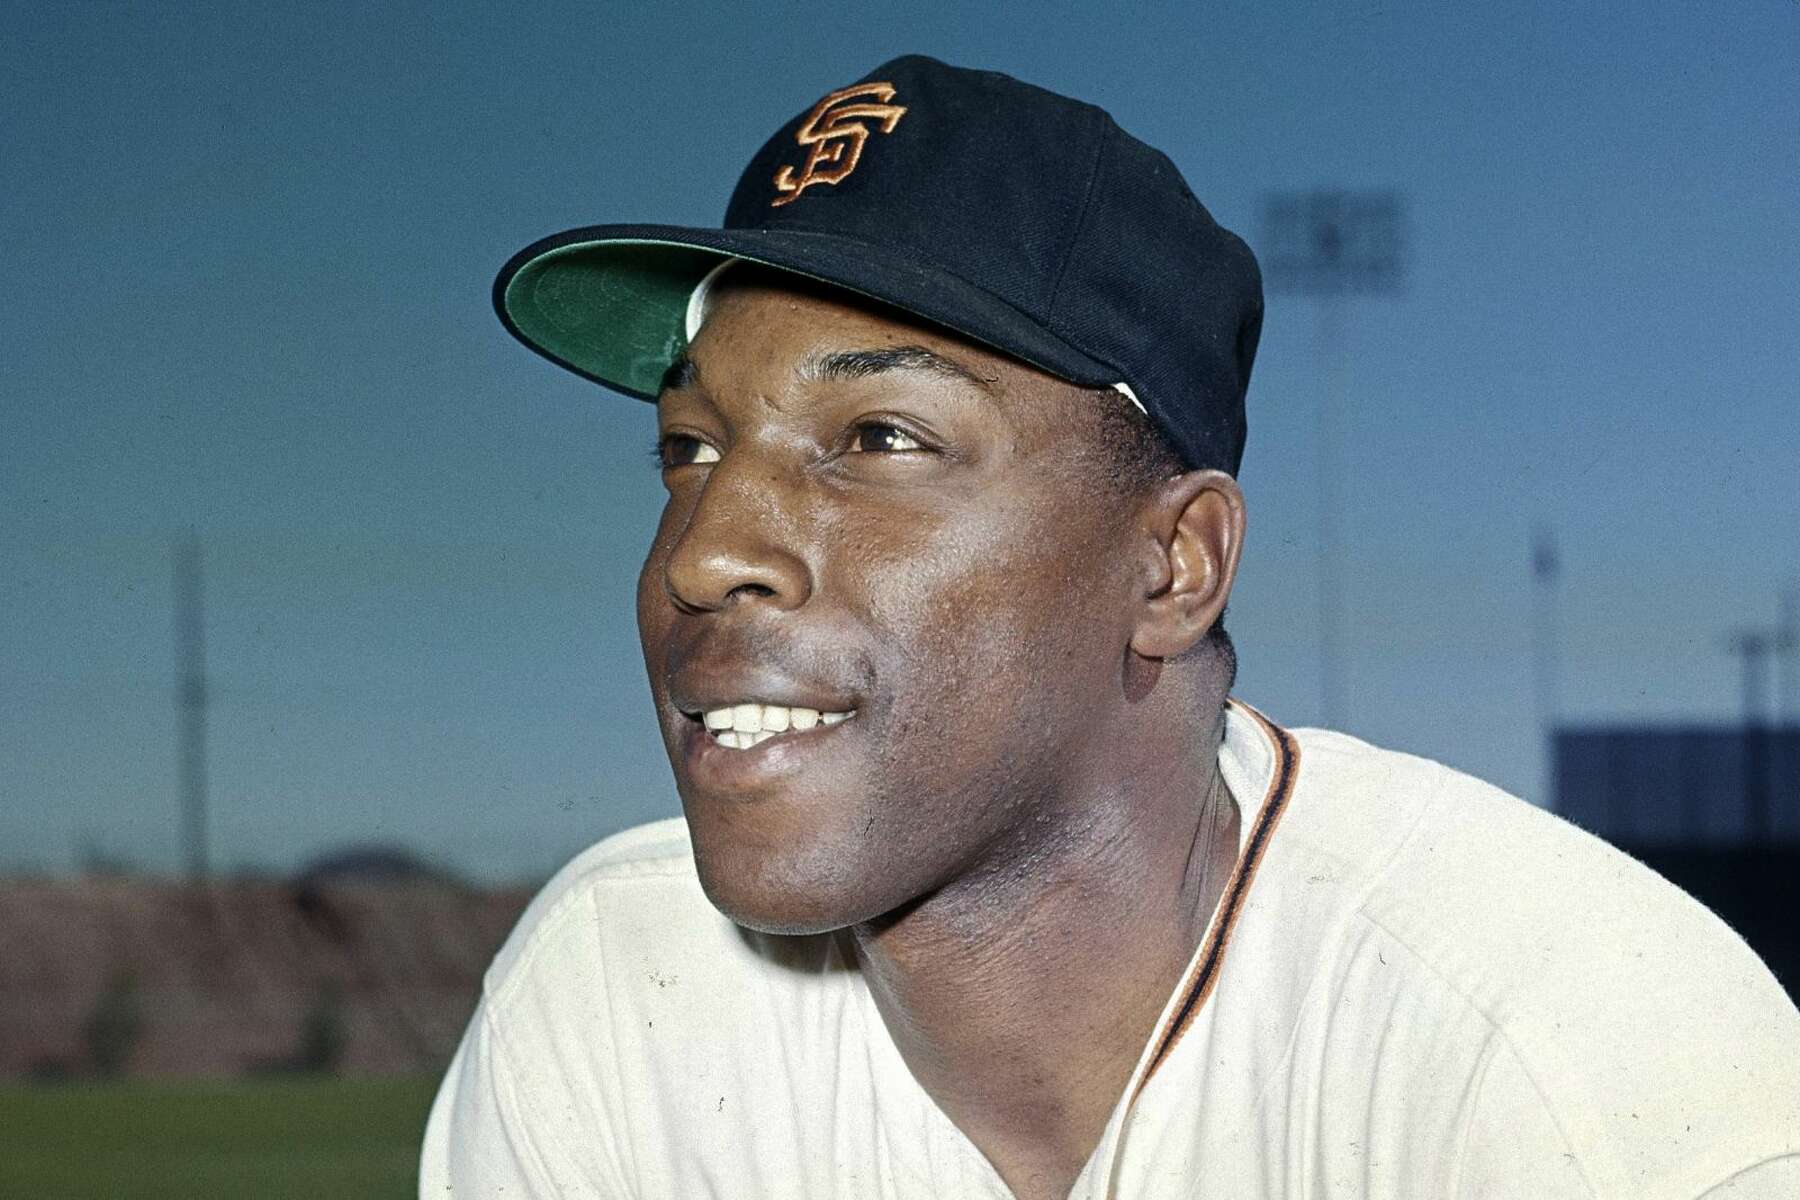 Willie McCovey has died at 80 - McCovey Chronicles